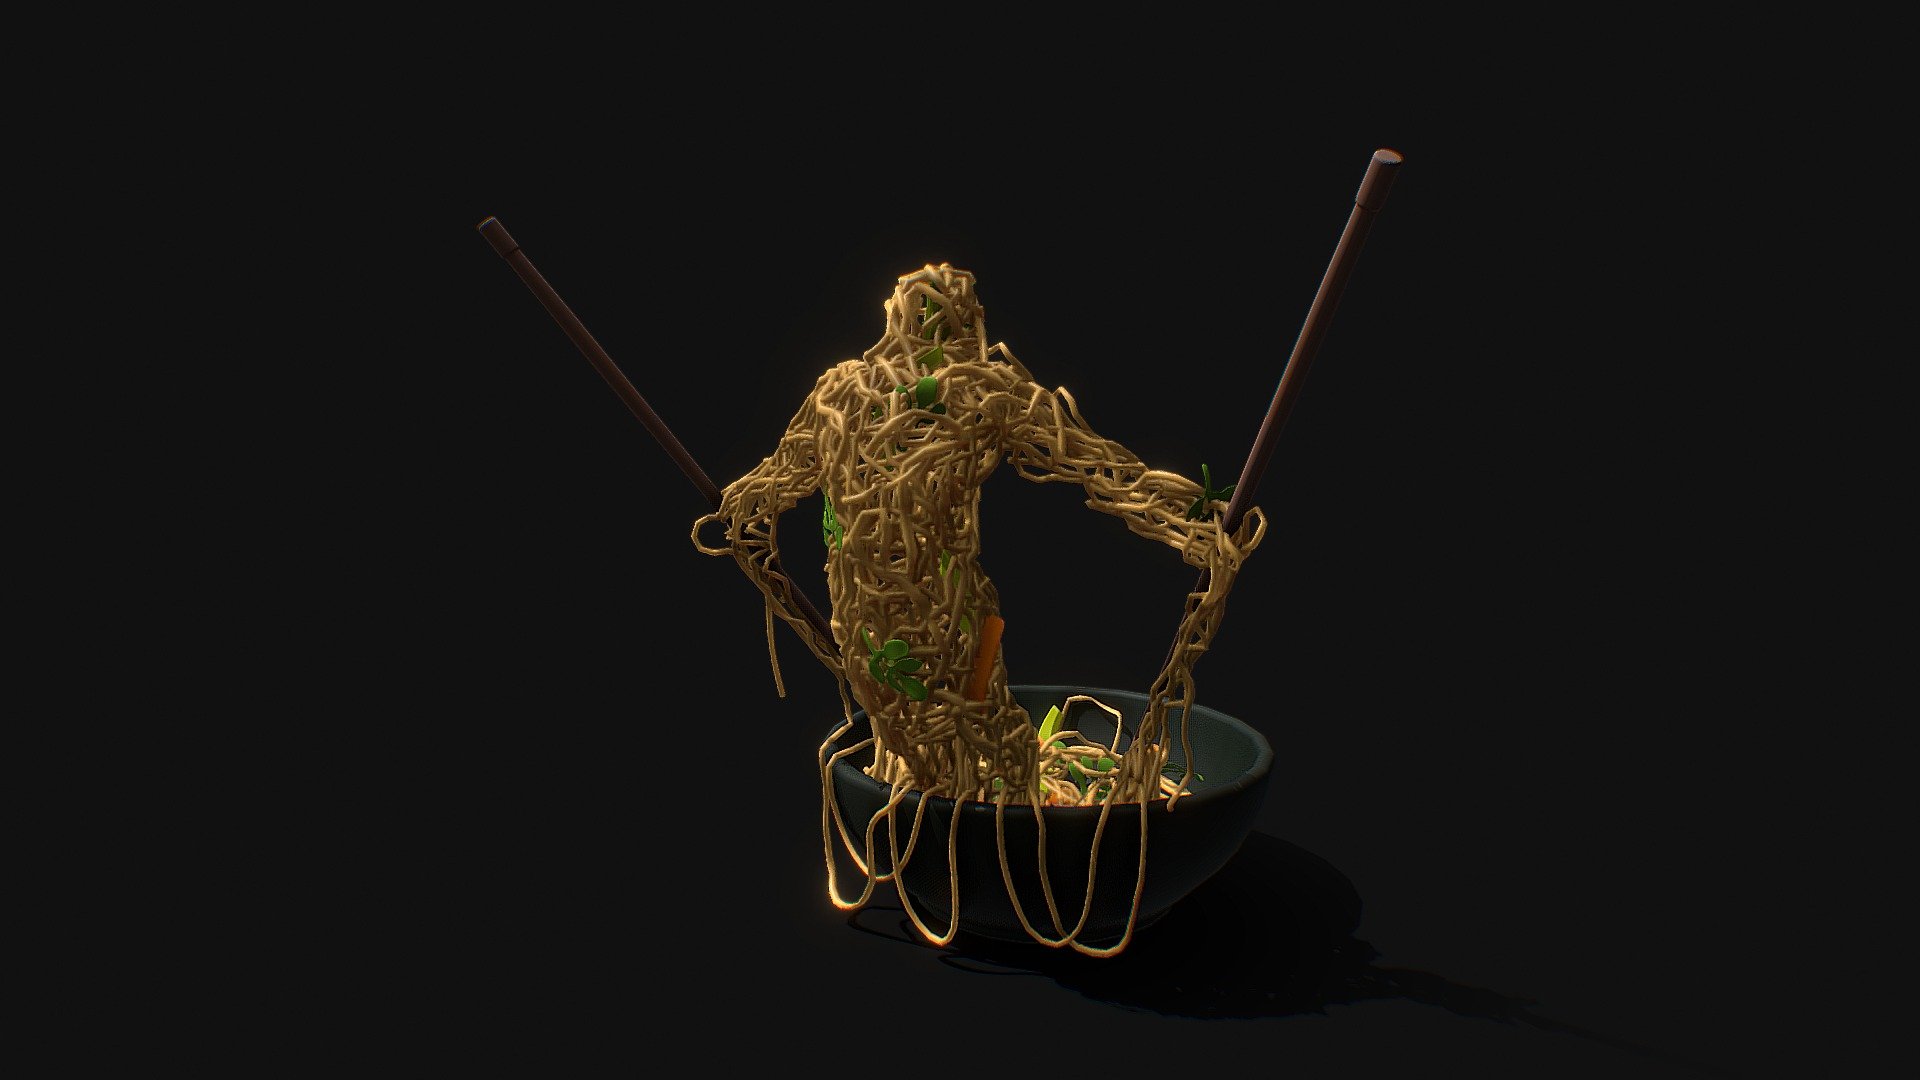 Spaghetti Slayer - A character which came into my mind when heard of Foodcharacter. 
He is a warrior to vanish hunger. 
The making of this art is as delicious as cooking it :) , enjoyed every strand of it.
Hope you all like this tasty food 3d model